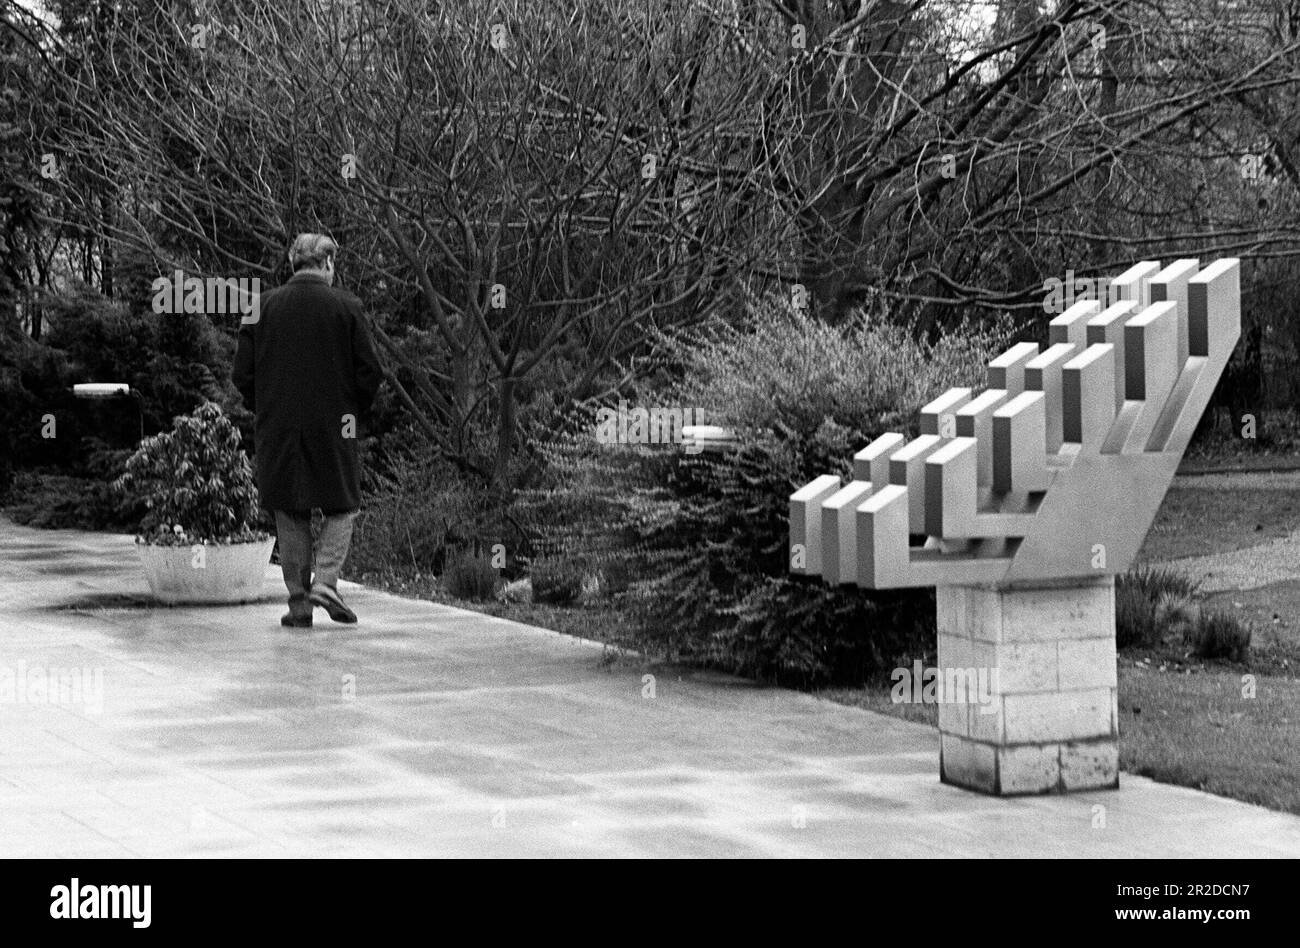 ARCHIVE PHOTO: The SPD will be 160 years old on May 23, 2023, 02SN BRANDT02121972PL.jpg Willy BRANDT, Federal Chancellor, Politics, SPD, walks in front of his house, December 2nd, 1972. ?SVEN SIMON#Huyssenallee 40-42 #45128 Essen#tel.0201/234556 fax:0201/234539 Account 1428150 Commerzbank Essen BLZ 36040039 www.photopool.de. Stock Photo